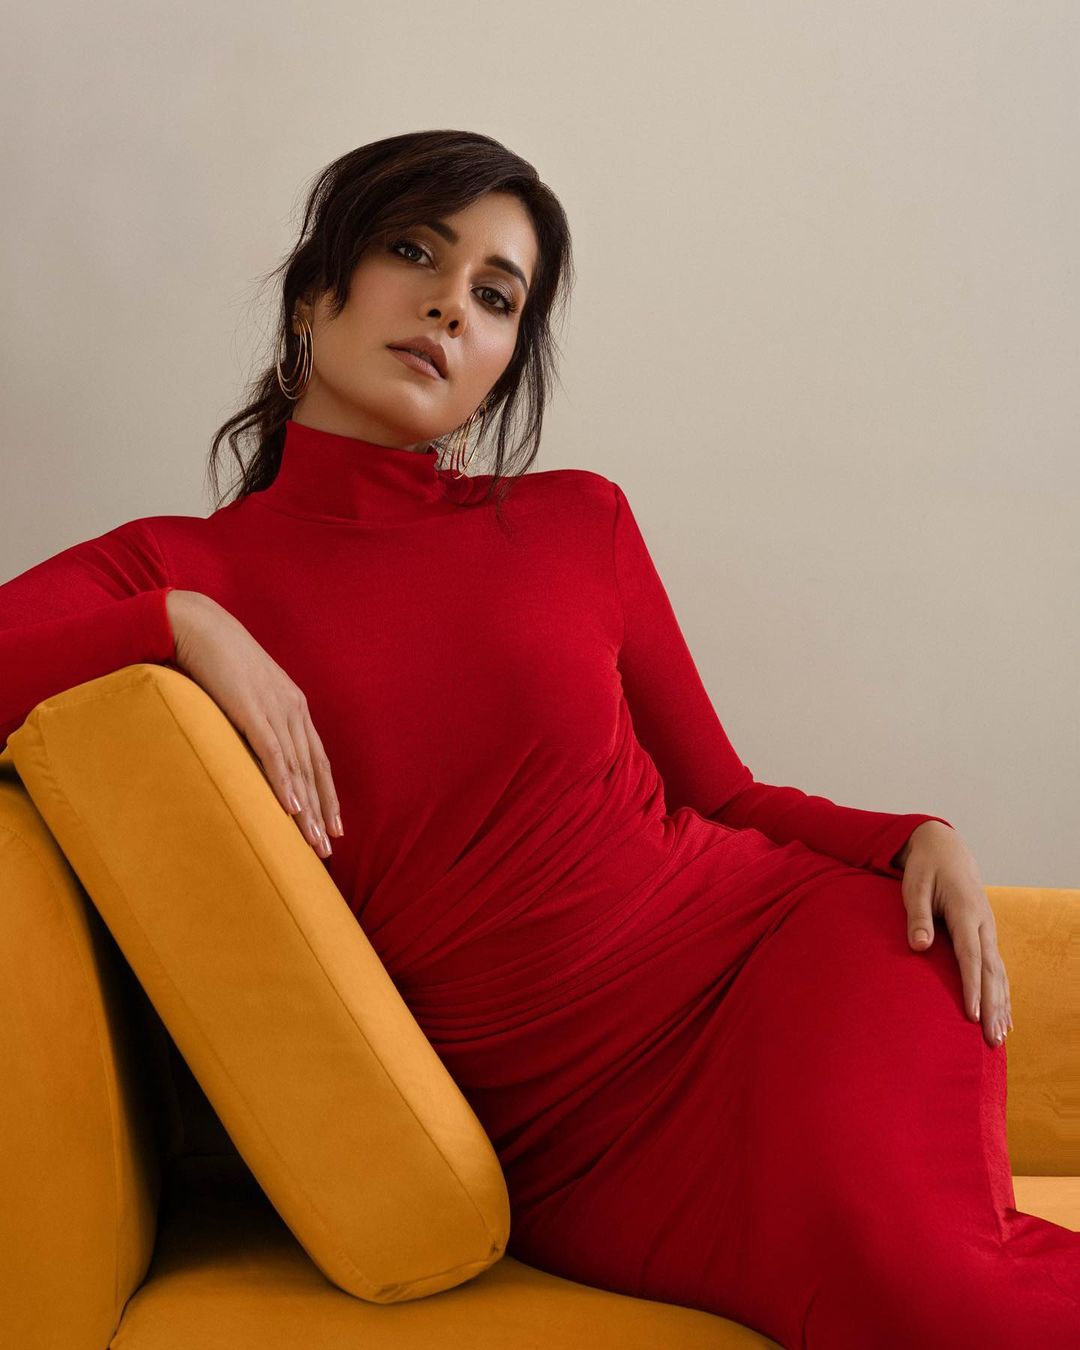 Raashii Khanna looks chic in the body-hugging red dress.